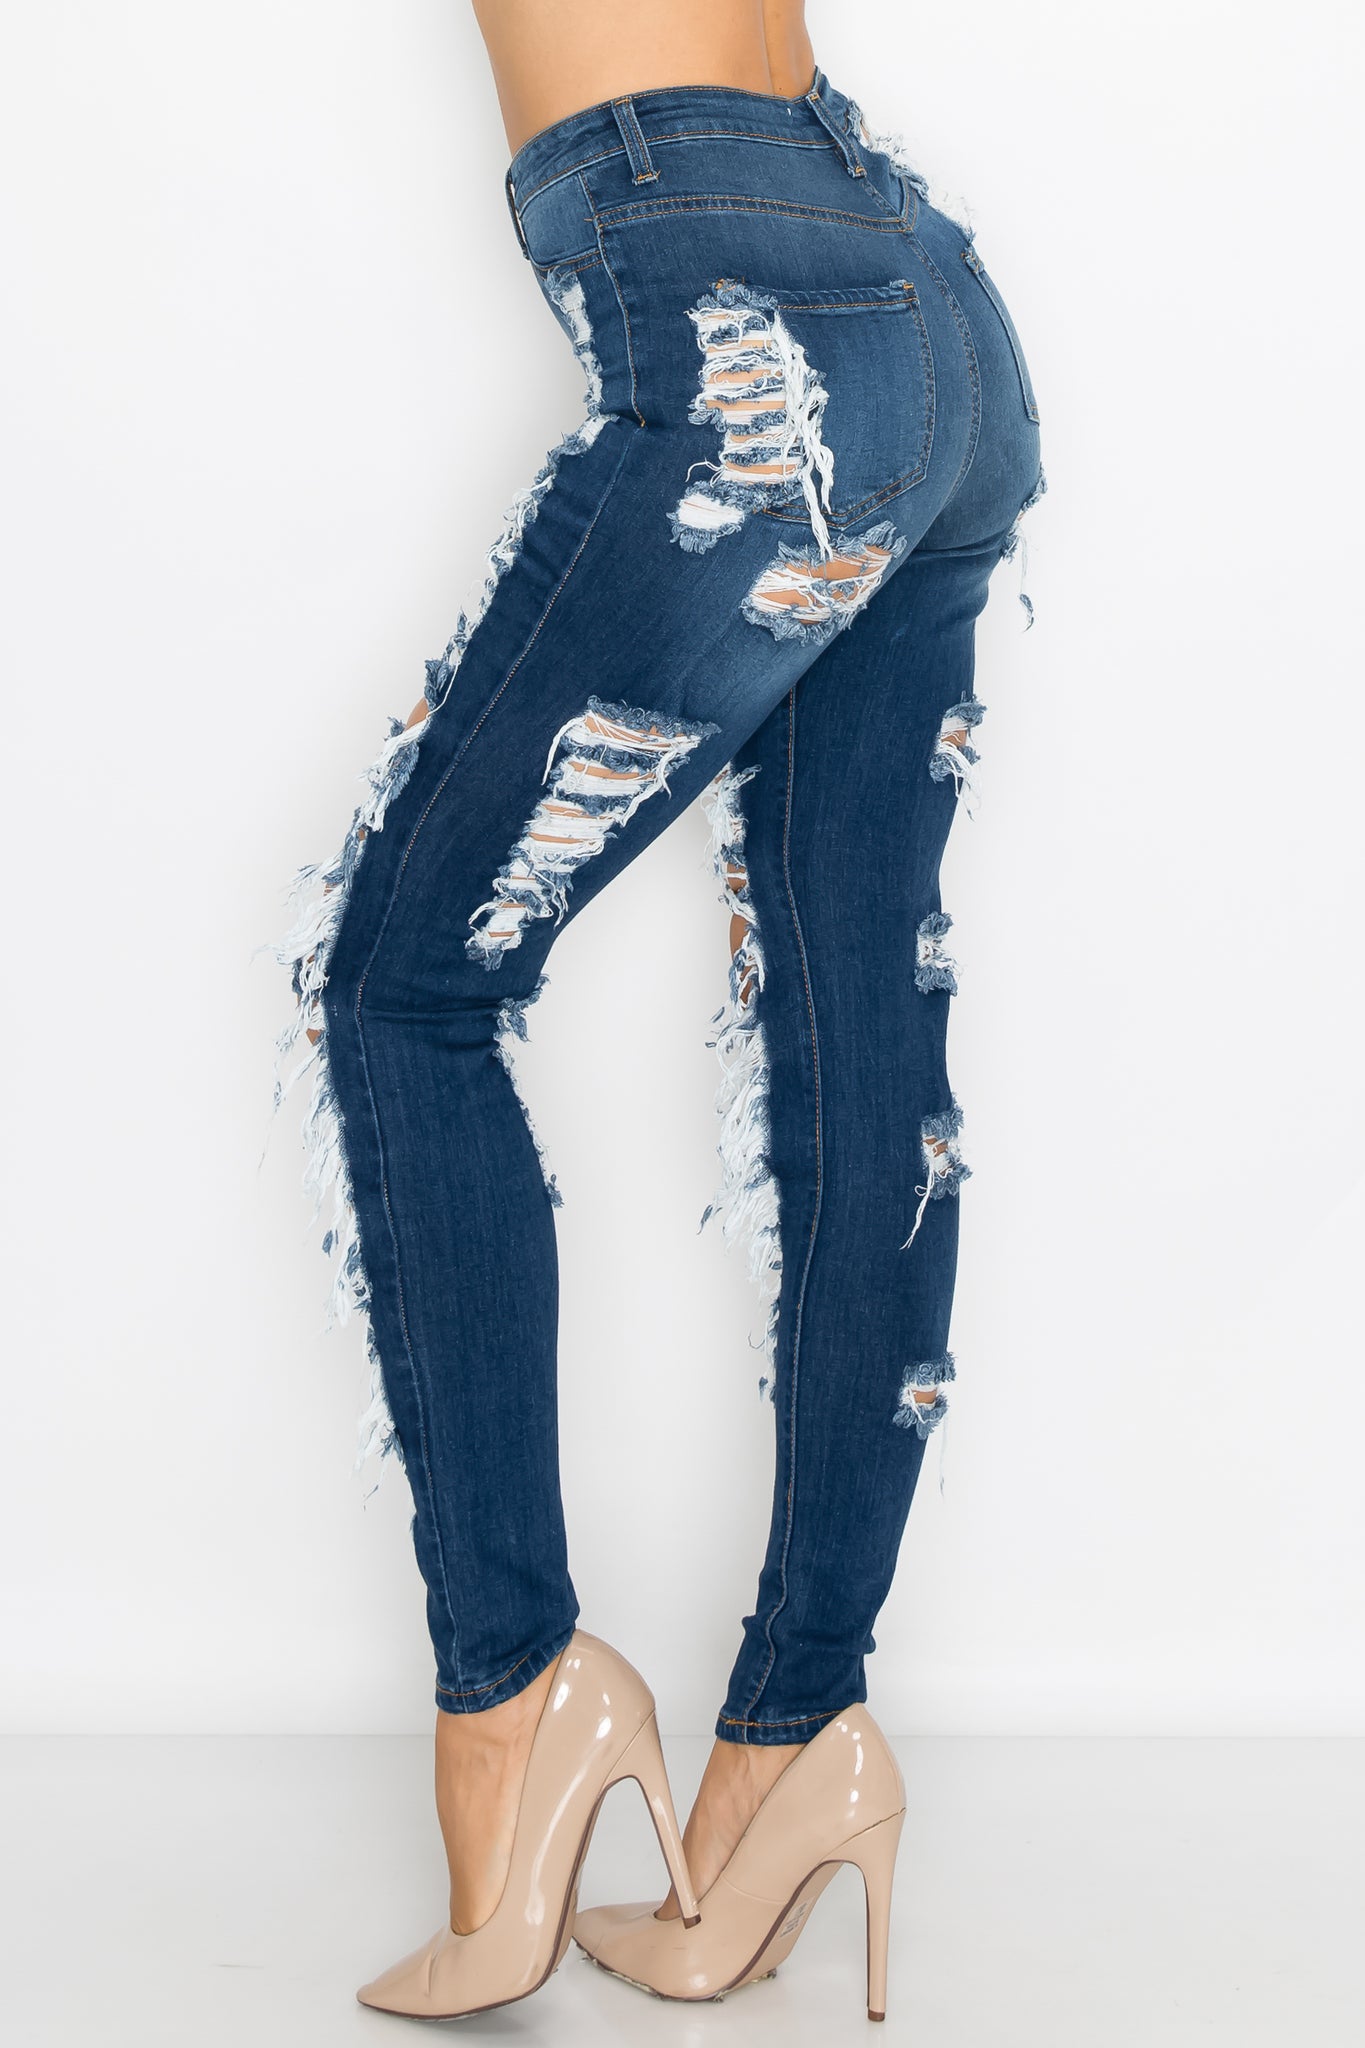 40098 Women's High Waisted Distressed Skinny Jeans with Cut Outs